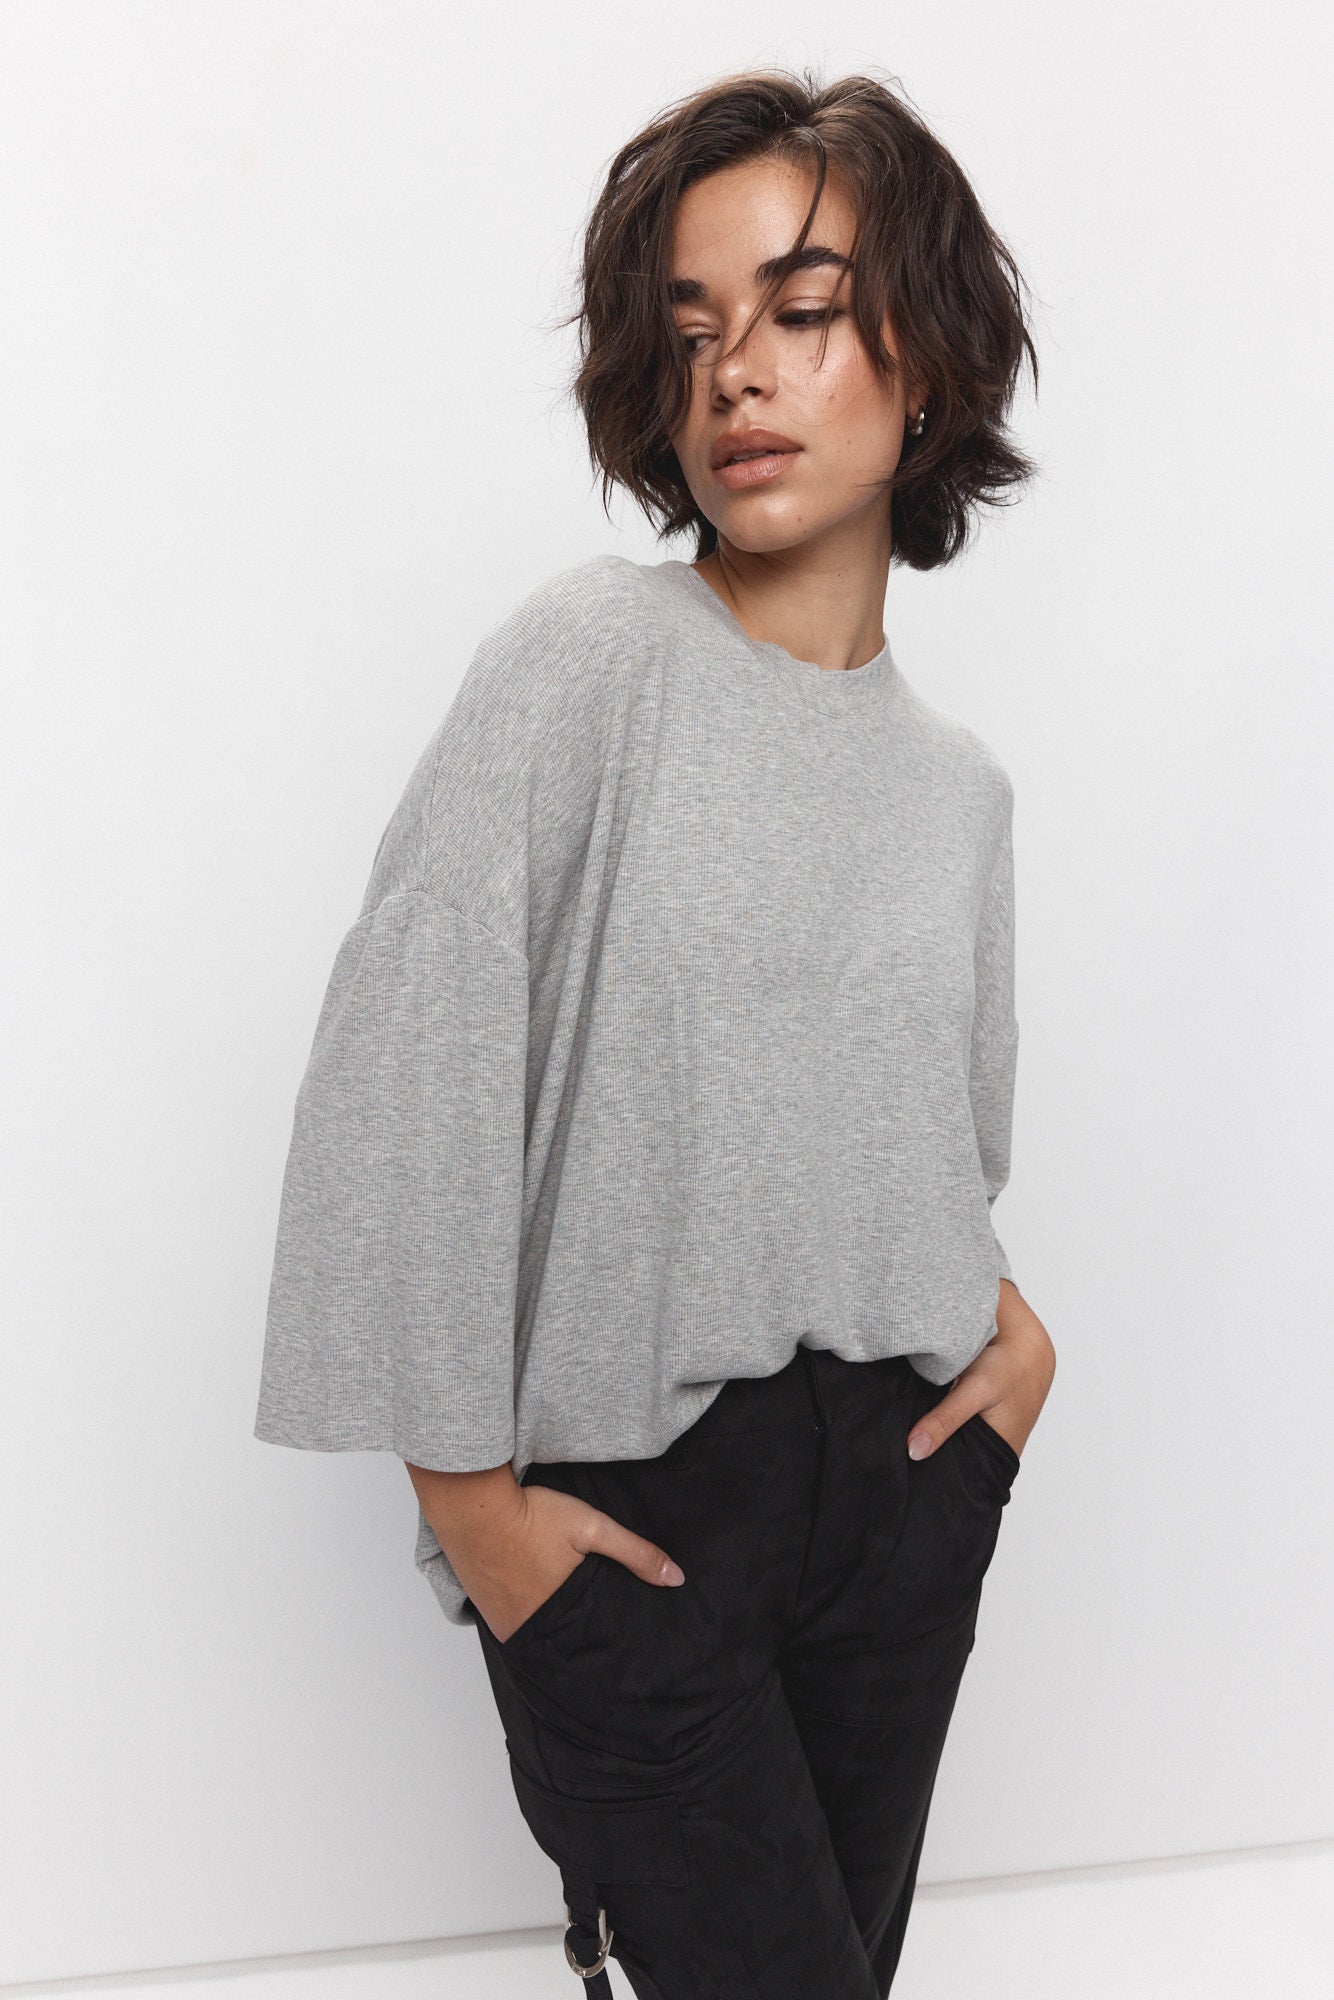 Textured gray sweater | Begonia